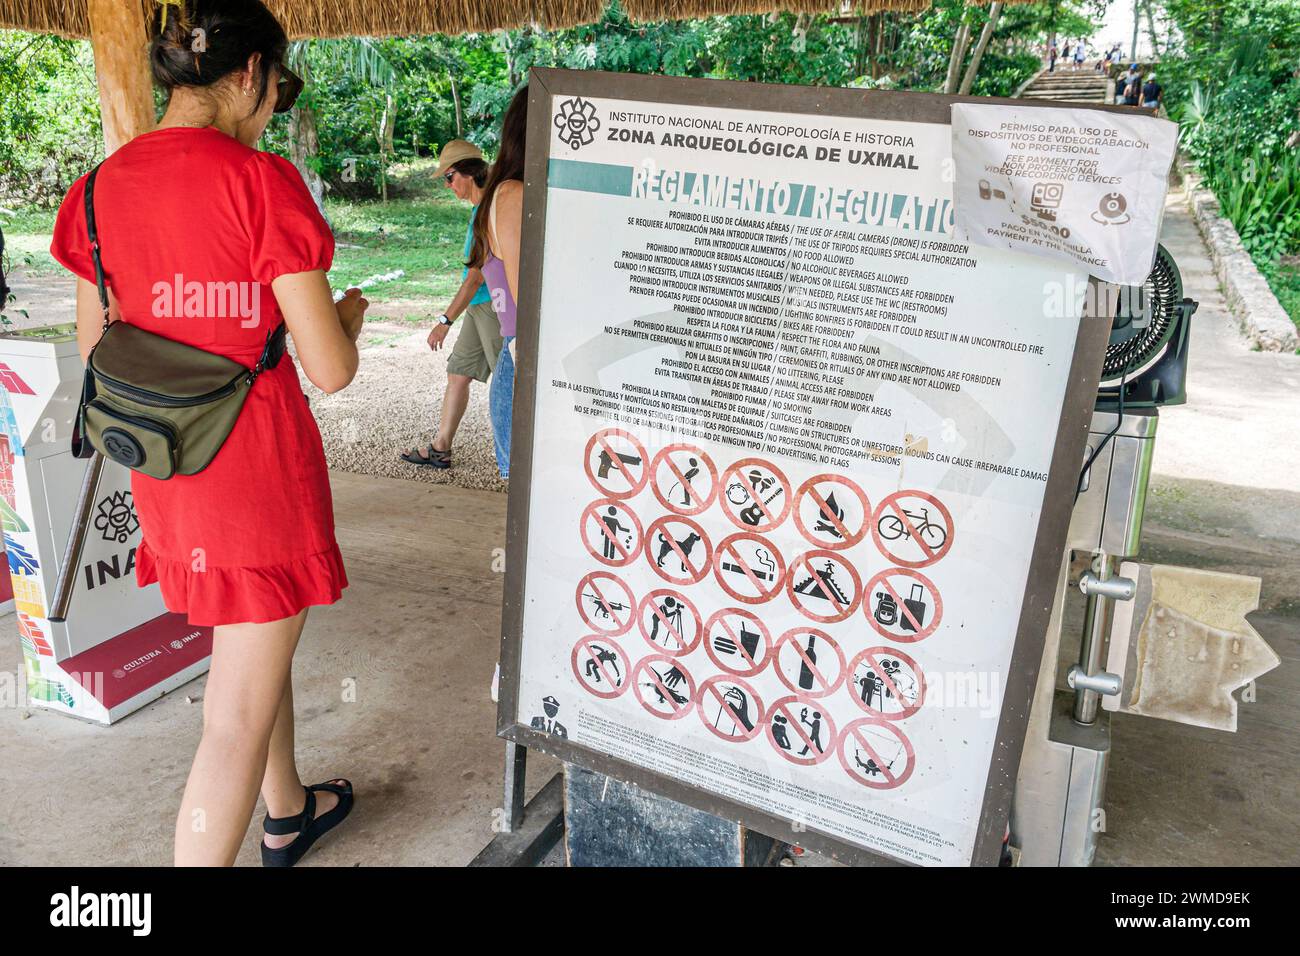 Merida Mexico,Puuc style Uxmal Archaeological Zone Site,Zona Arqueologica de Uxmal,classic Mayan city,arriving visitors,sign rules regulations,woman w Stock Photo